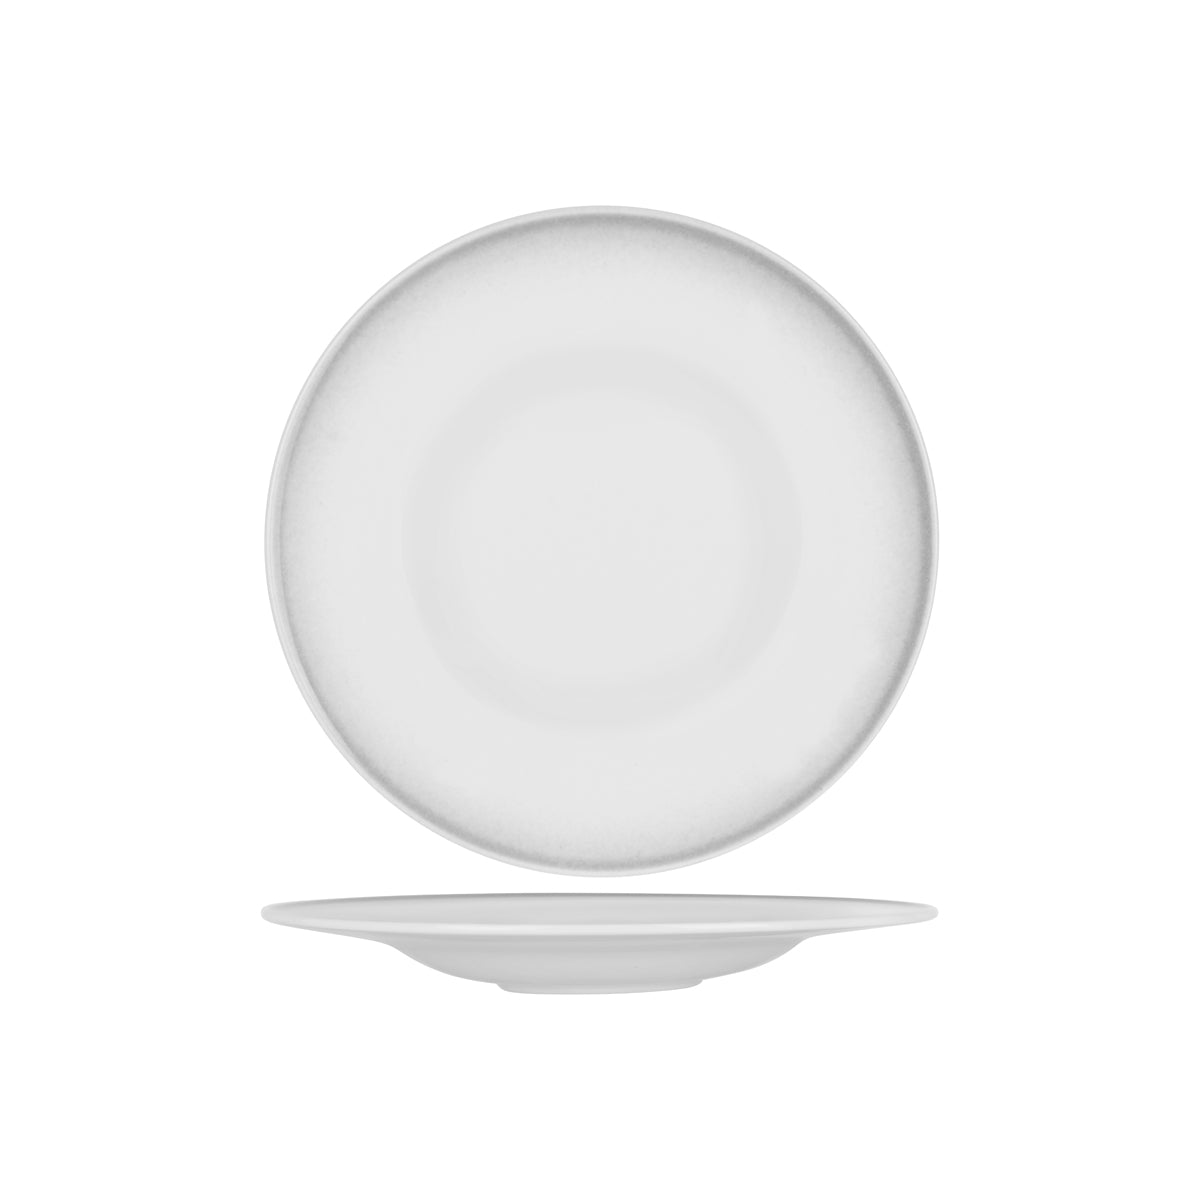 903007 Tablekraft Frosted Steel Round Signature Plate 300x125mm Tomkin Australia Hospitality Supplies